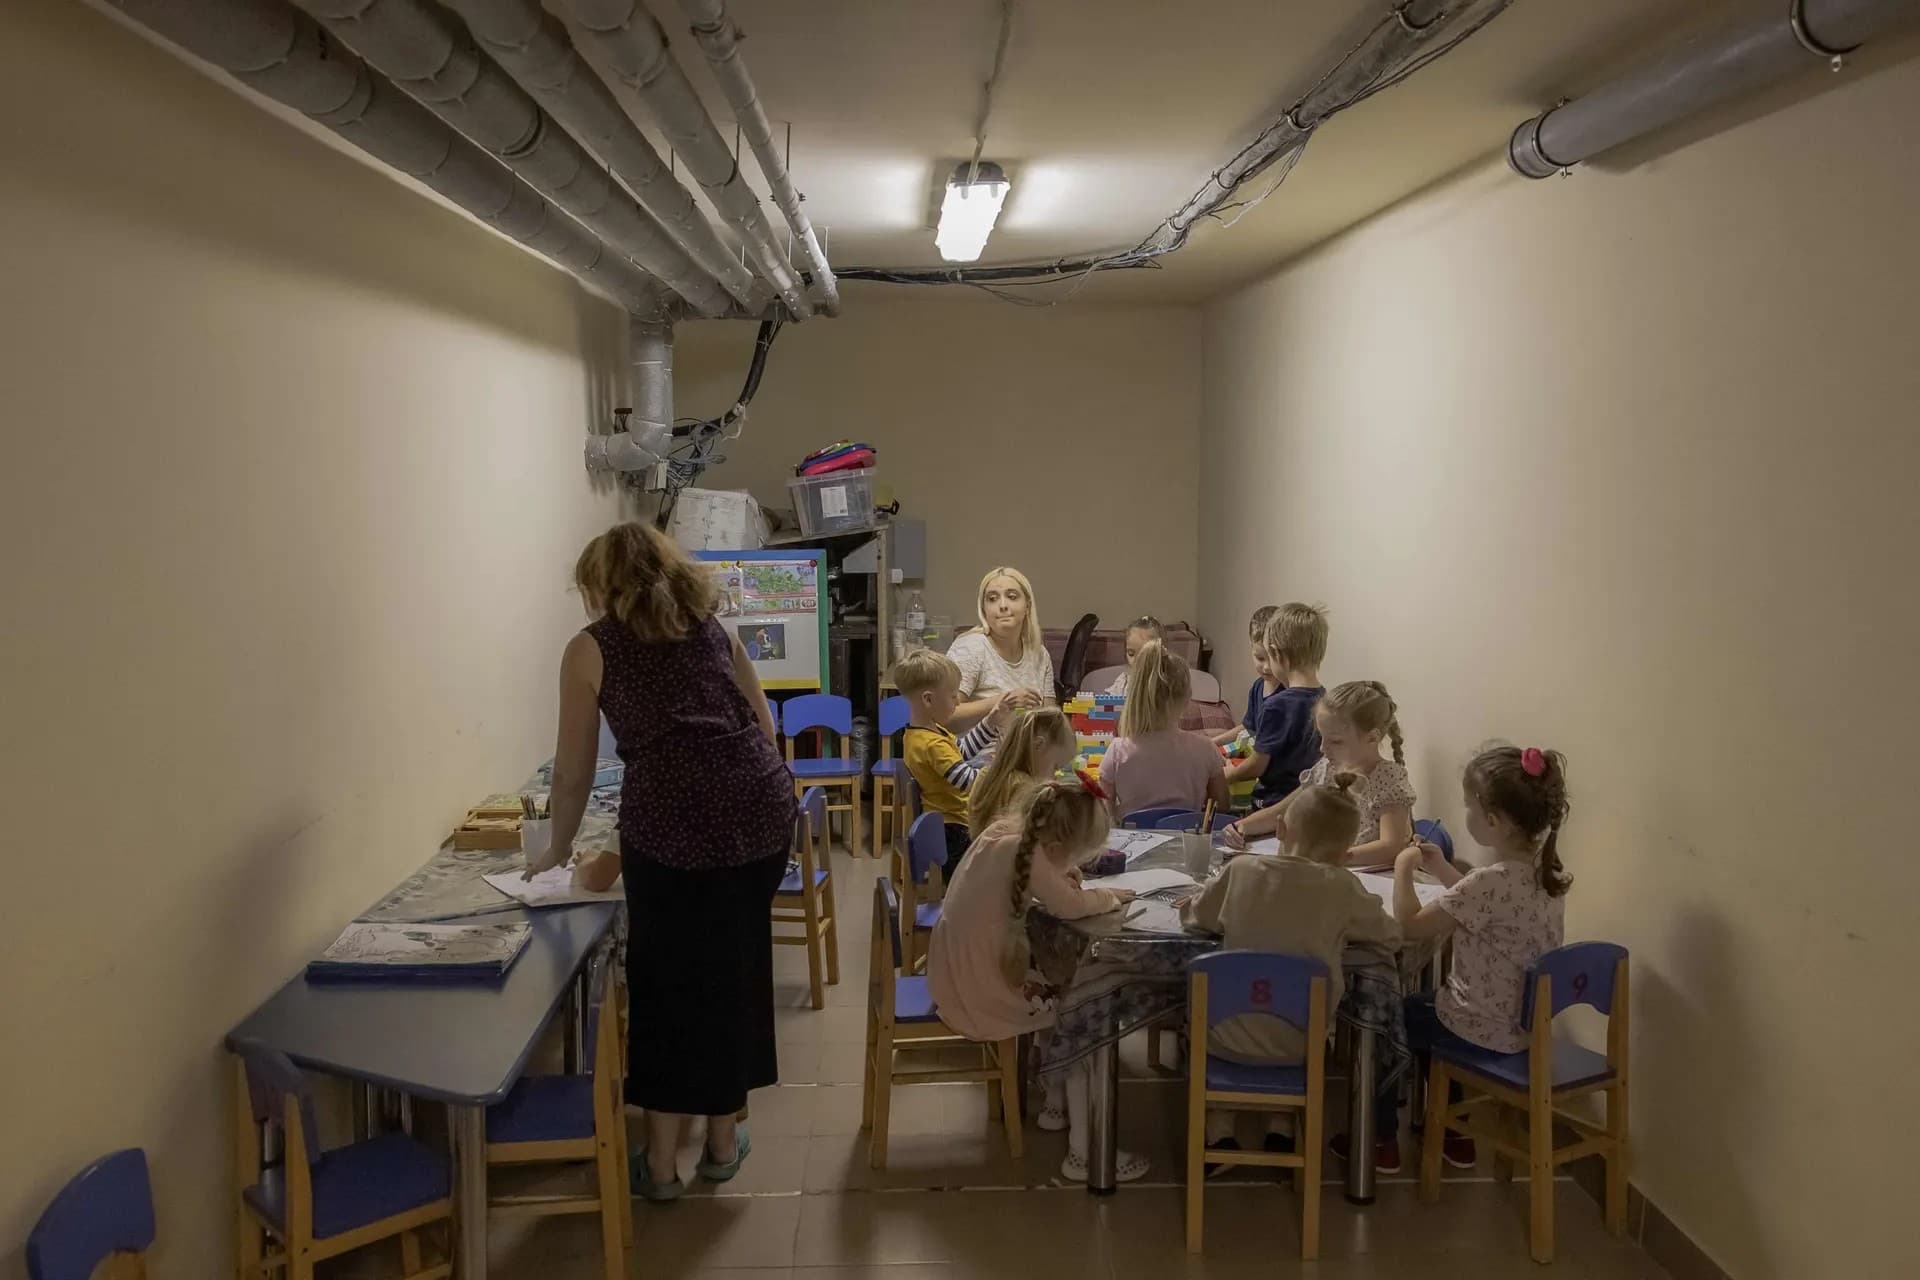 Children and their teachers wait in the basement of a kindergarten being used as a bomb shelter during an airstrike alarm in Kryvyi Rih